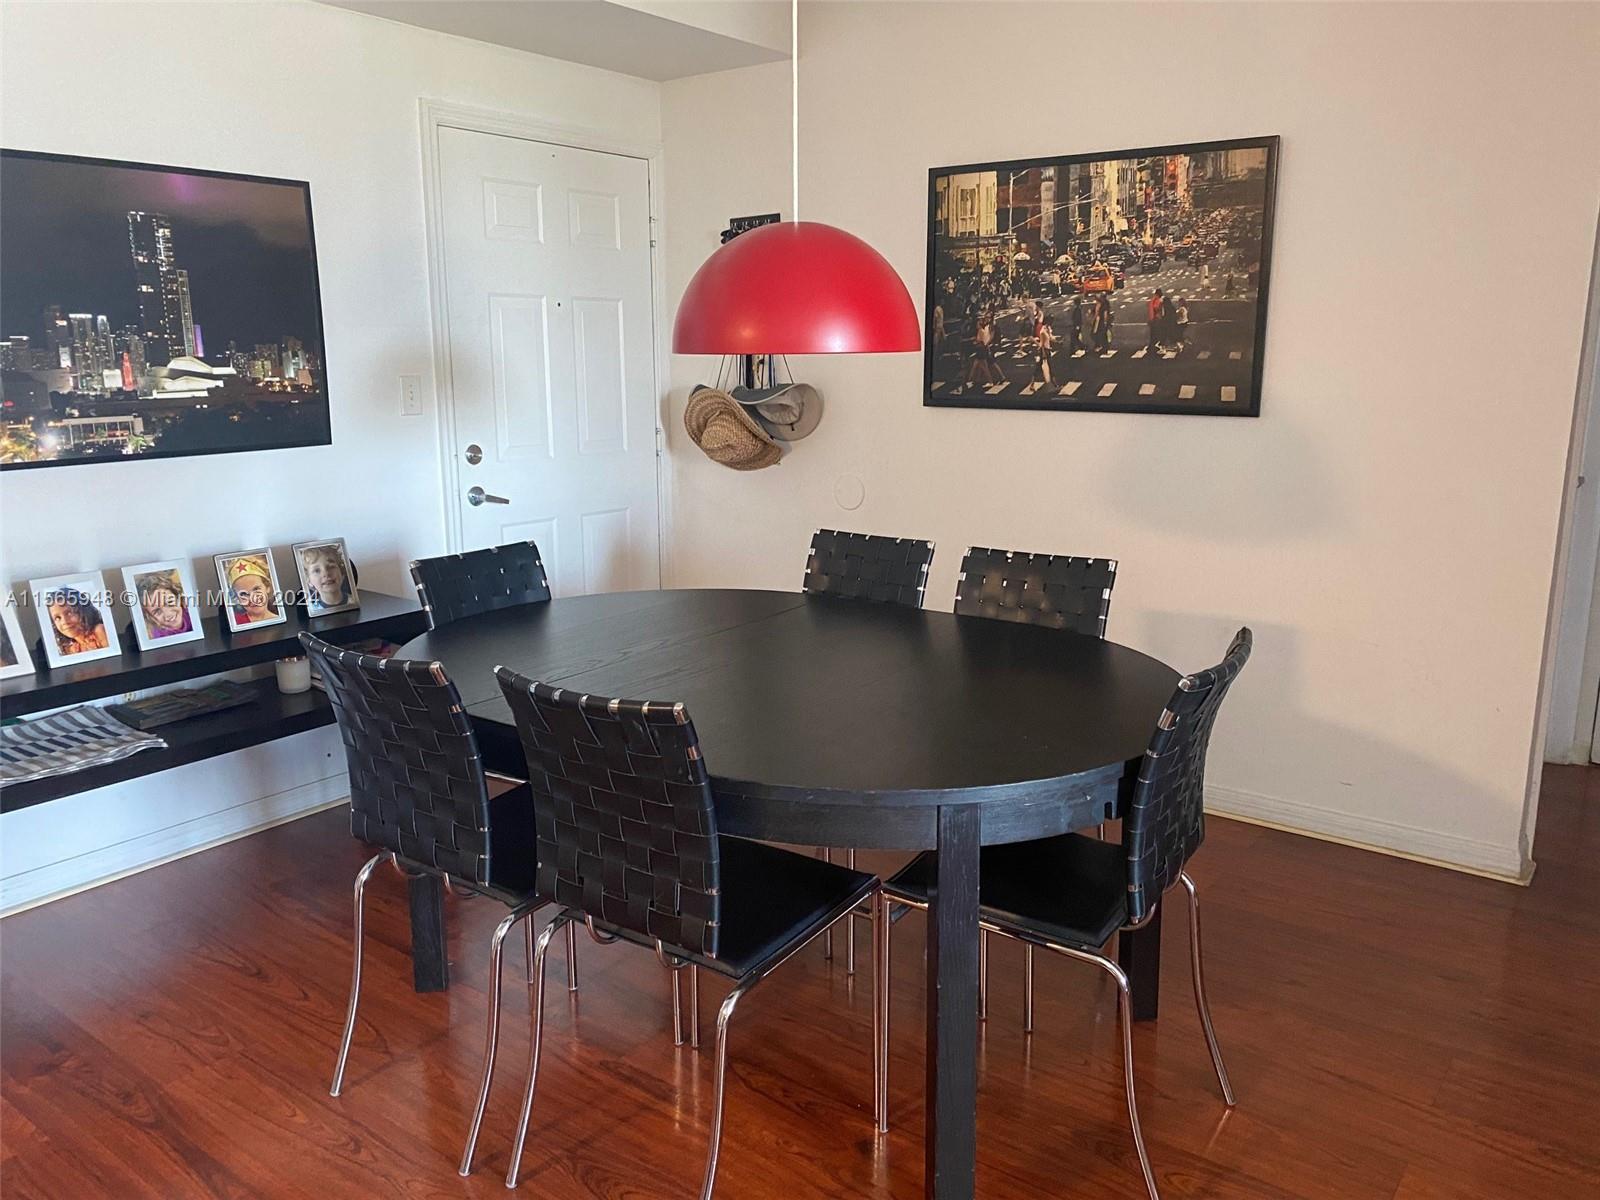 Beautiful 2 bed / 2 bath in the heart of of Biscayne. Building has concierge, 24 hour security, swimming pool, Jacuzzi and more amenities. This unit has 2 assigned covered parking spaces. Washer and Dryer inside unit. Located in the new hot area of Edgewater. Centrally located near the bay, park, transportation, downtown Miami, Preforming Art Center Theater and Design District.
There is a 3rd parking space available for sale.